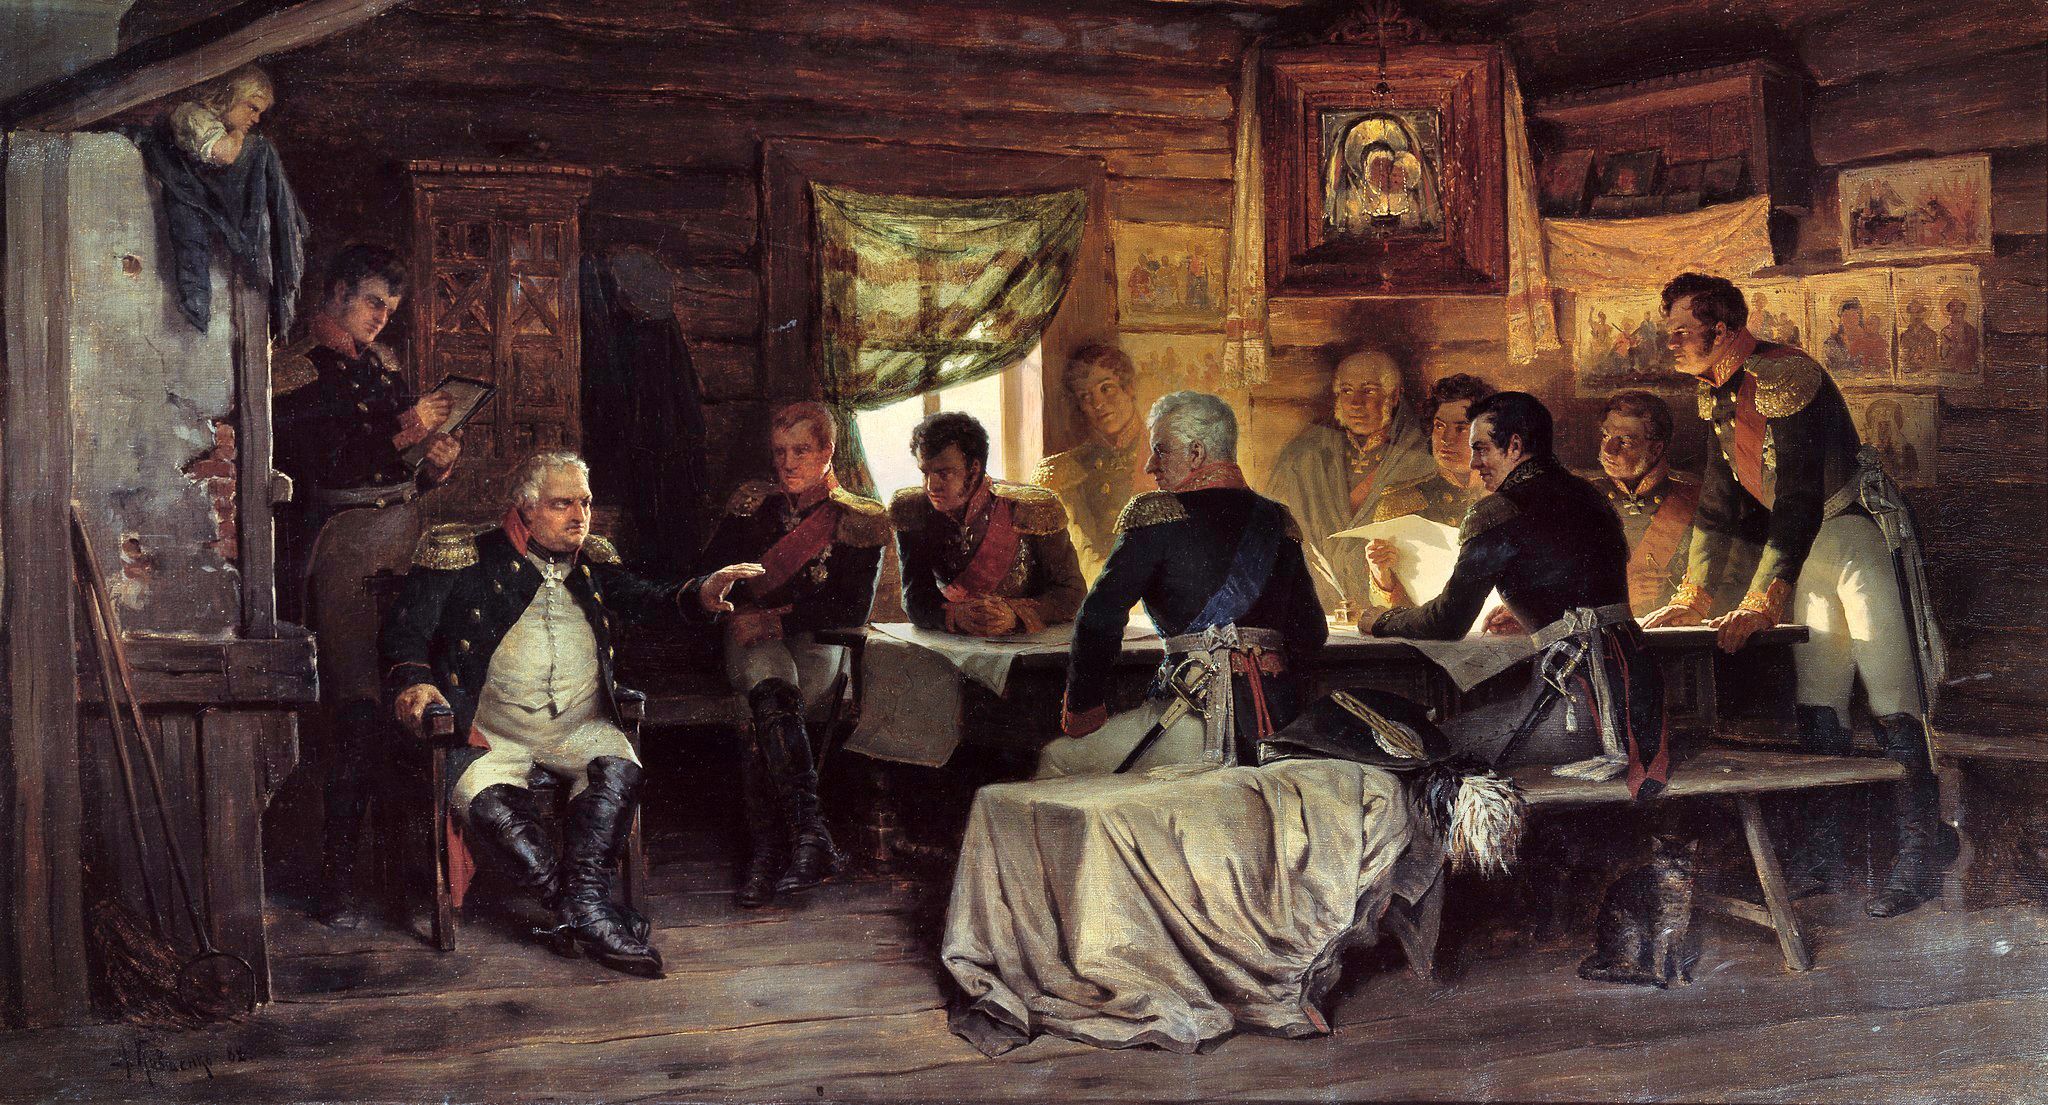 Marshal Mikhail Kutuzov conducts a council of war in a peasant’s cabin. Tsar Alexander, who detested the elderly commander, appointed him to overall command because he was widely popular with the Russian people and soldiers.